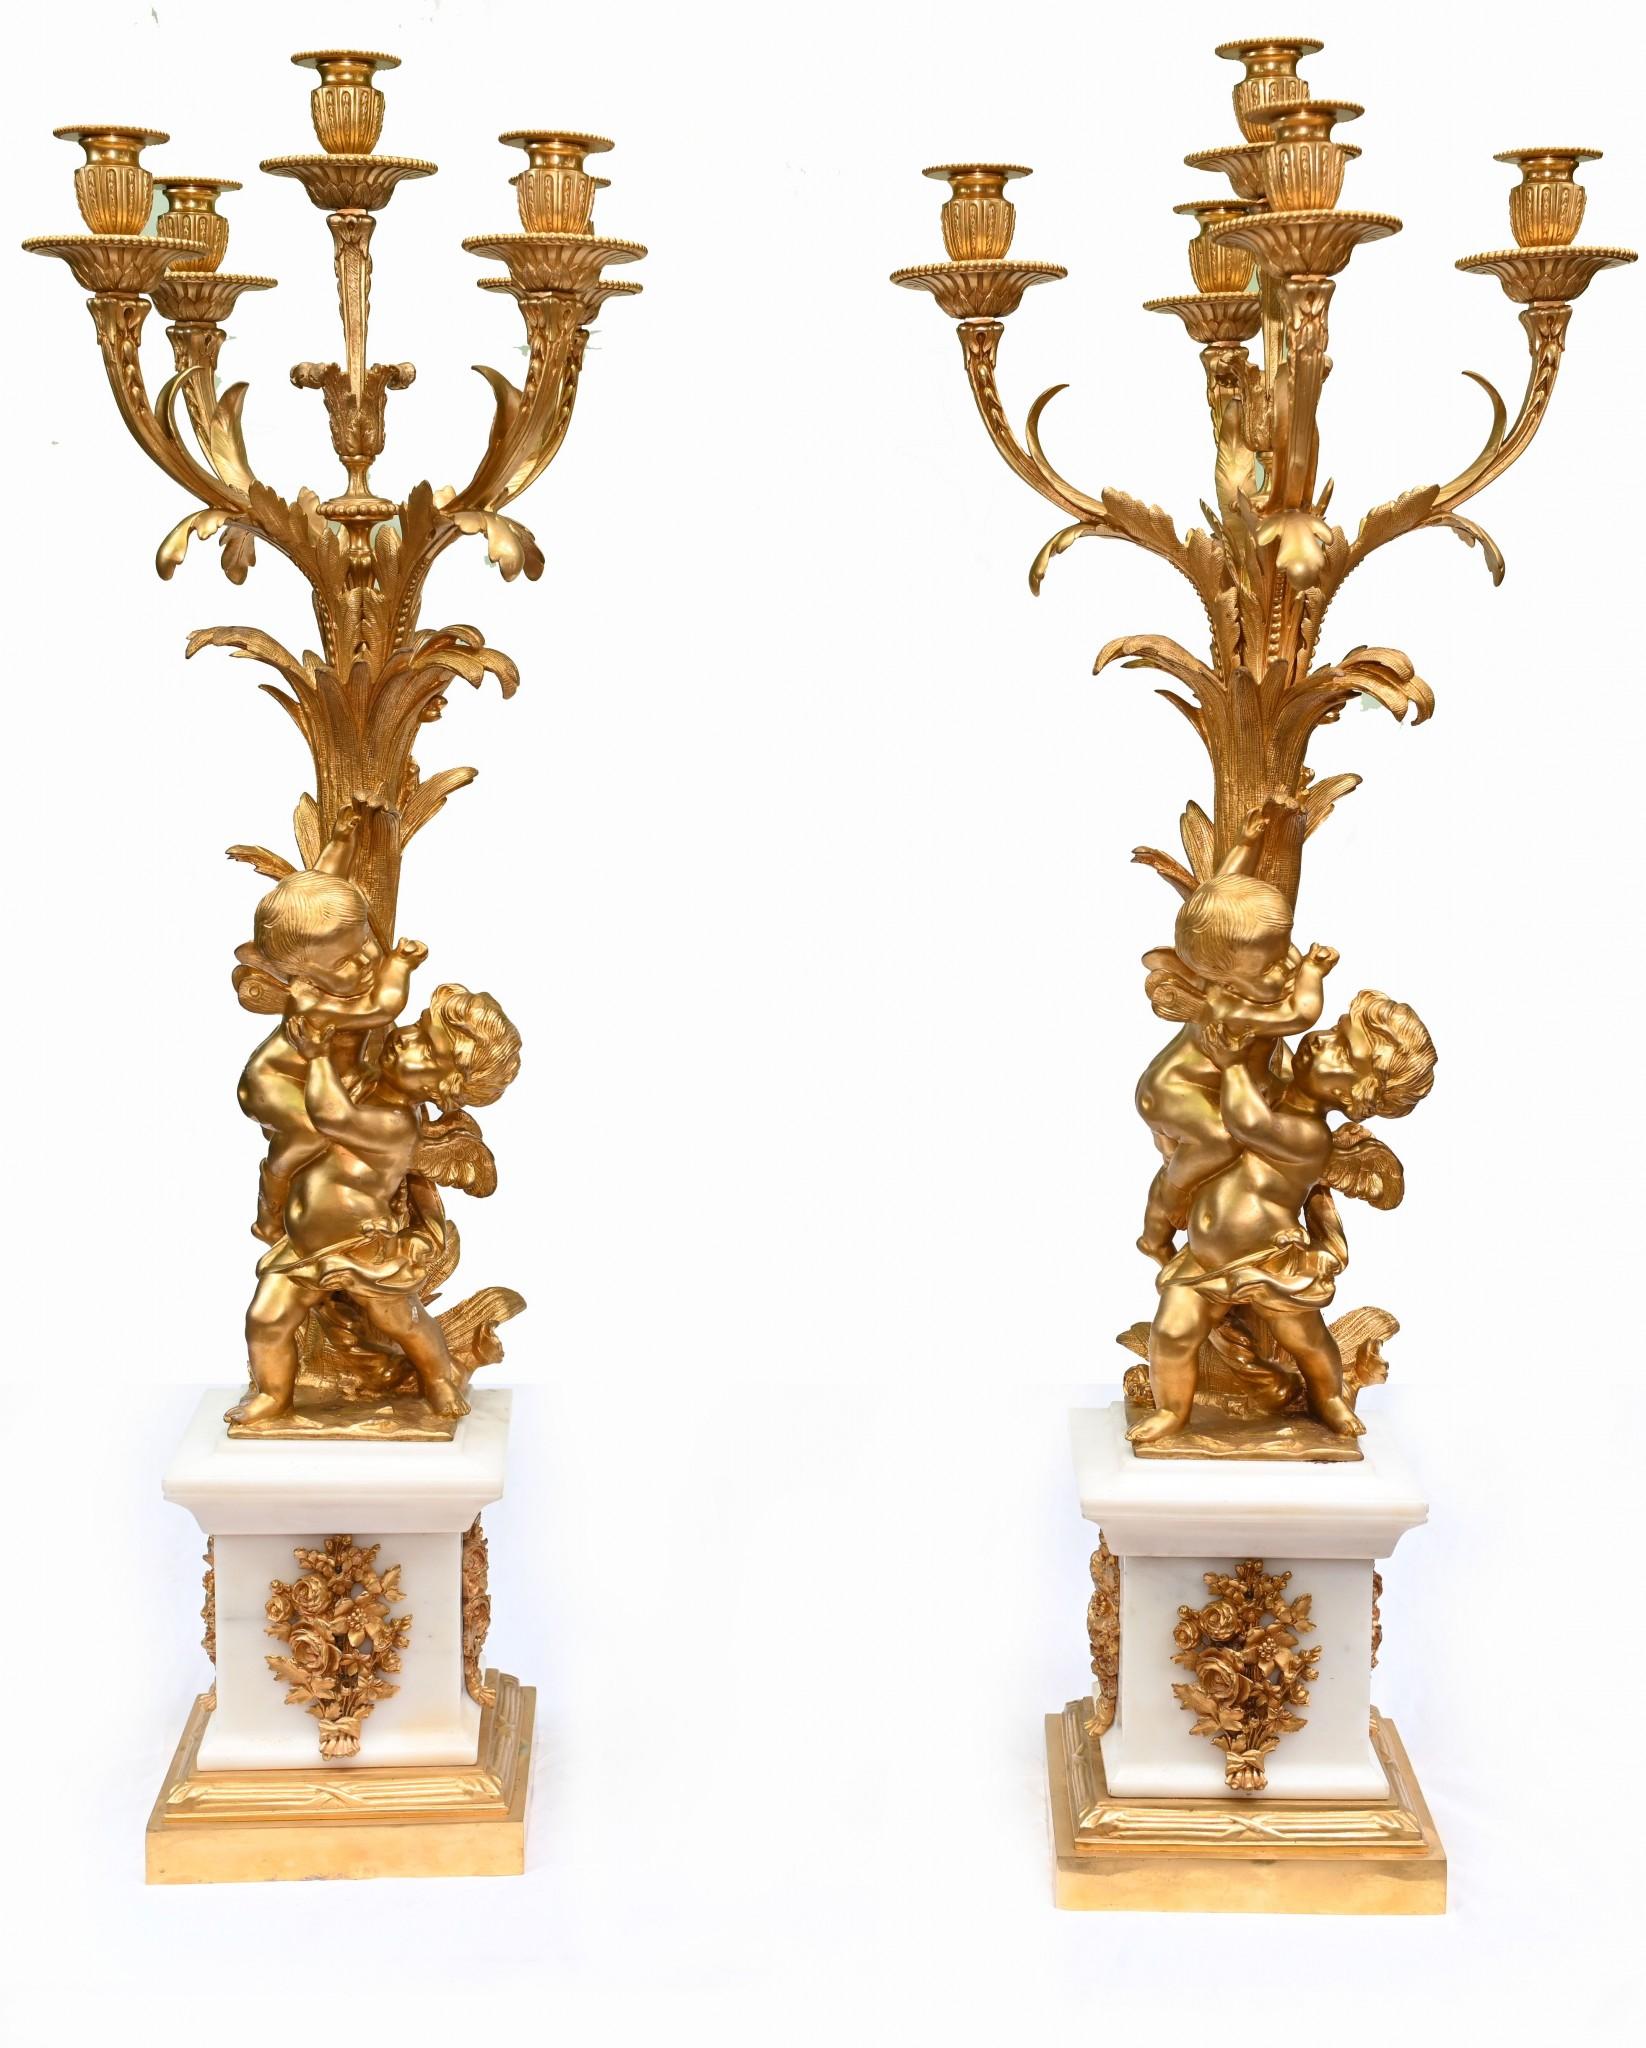 Stunning pair of large gilt and marble candelabras in the Clodion manner
Good size at just under three feet tall
So eye catching with the pair of cherubs intertwined holiding aloft the candelabra branches
The casting of the gilt is very detailed and